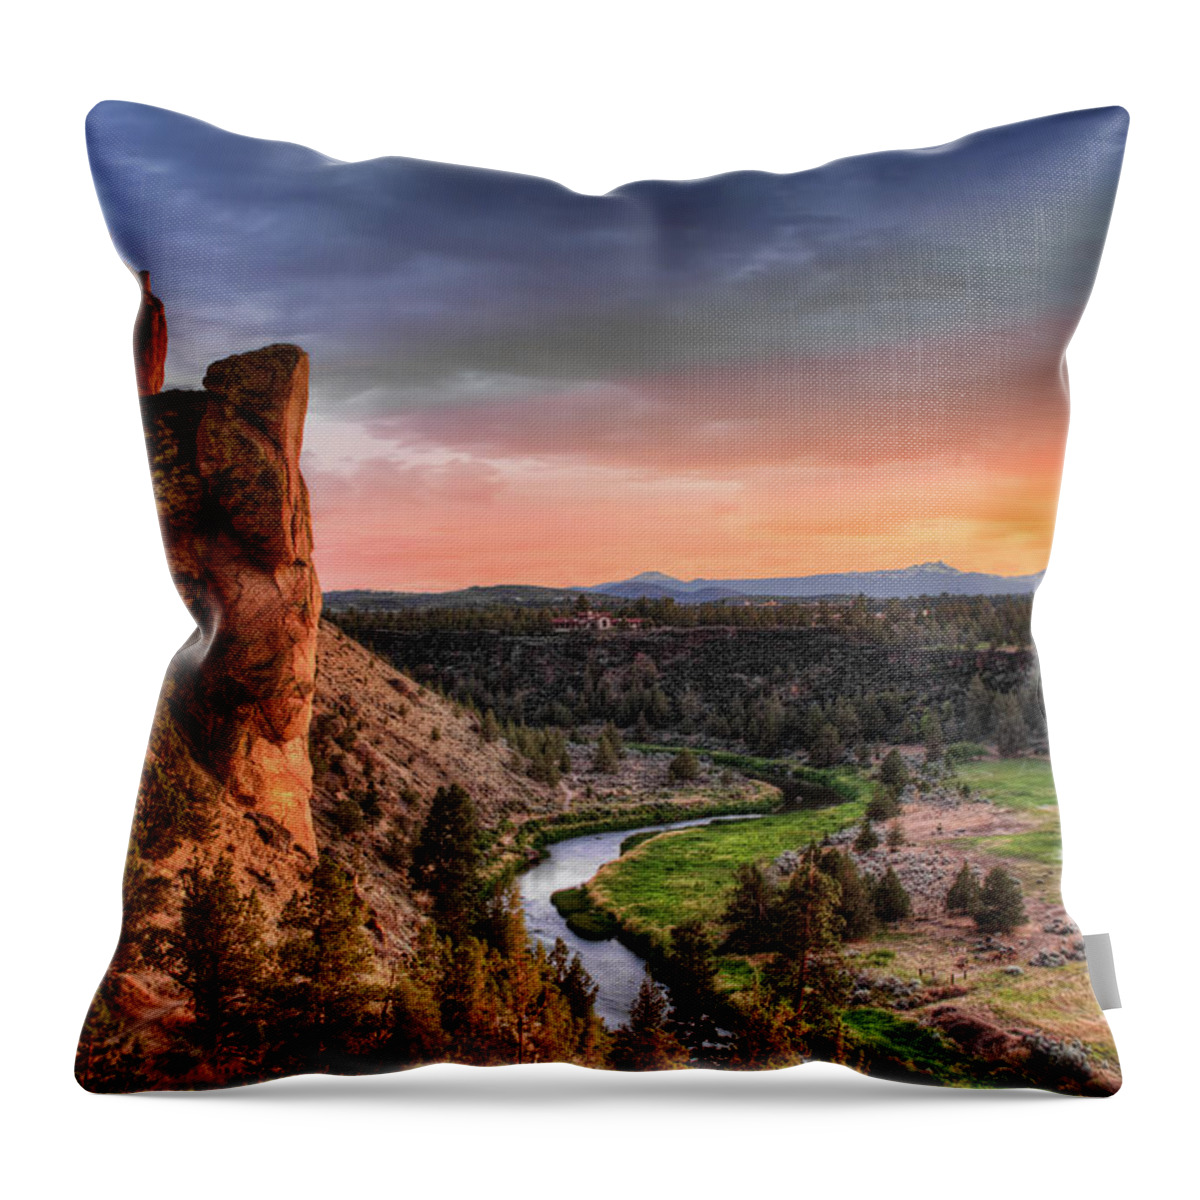 Scenics Throw Pillow featuring the photograph Sunset At Smith Rock State Park In by David Gn Photography